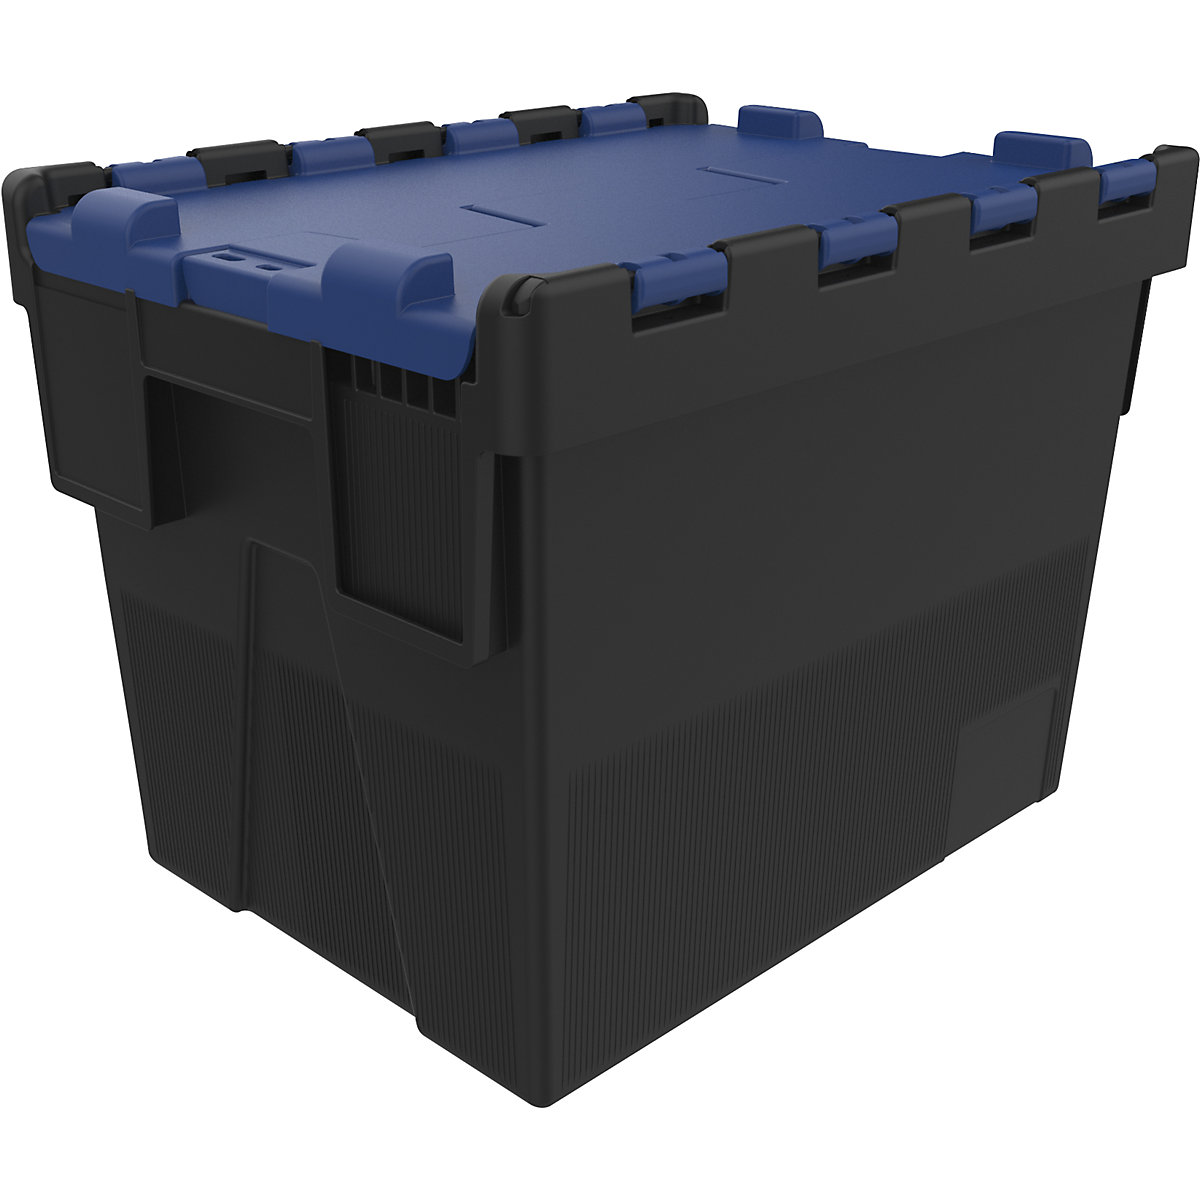 Reusable stacking container, LxWxH 400 x 300 x 306 mm, black/blue-3